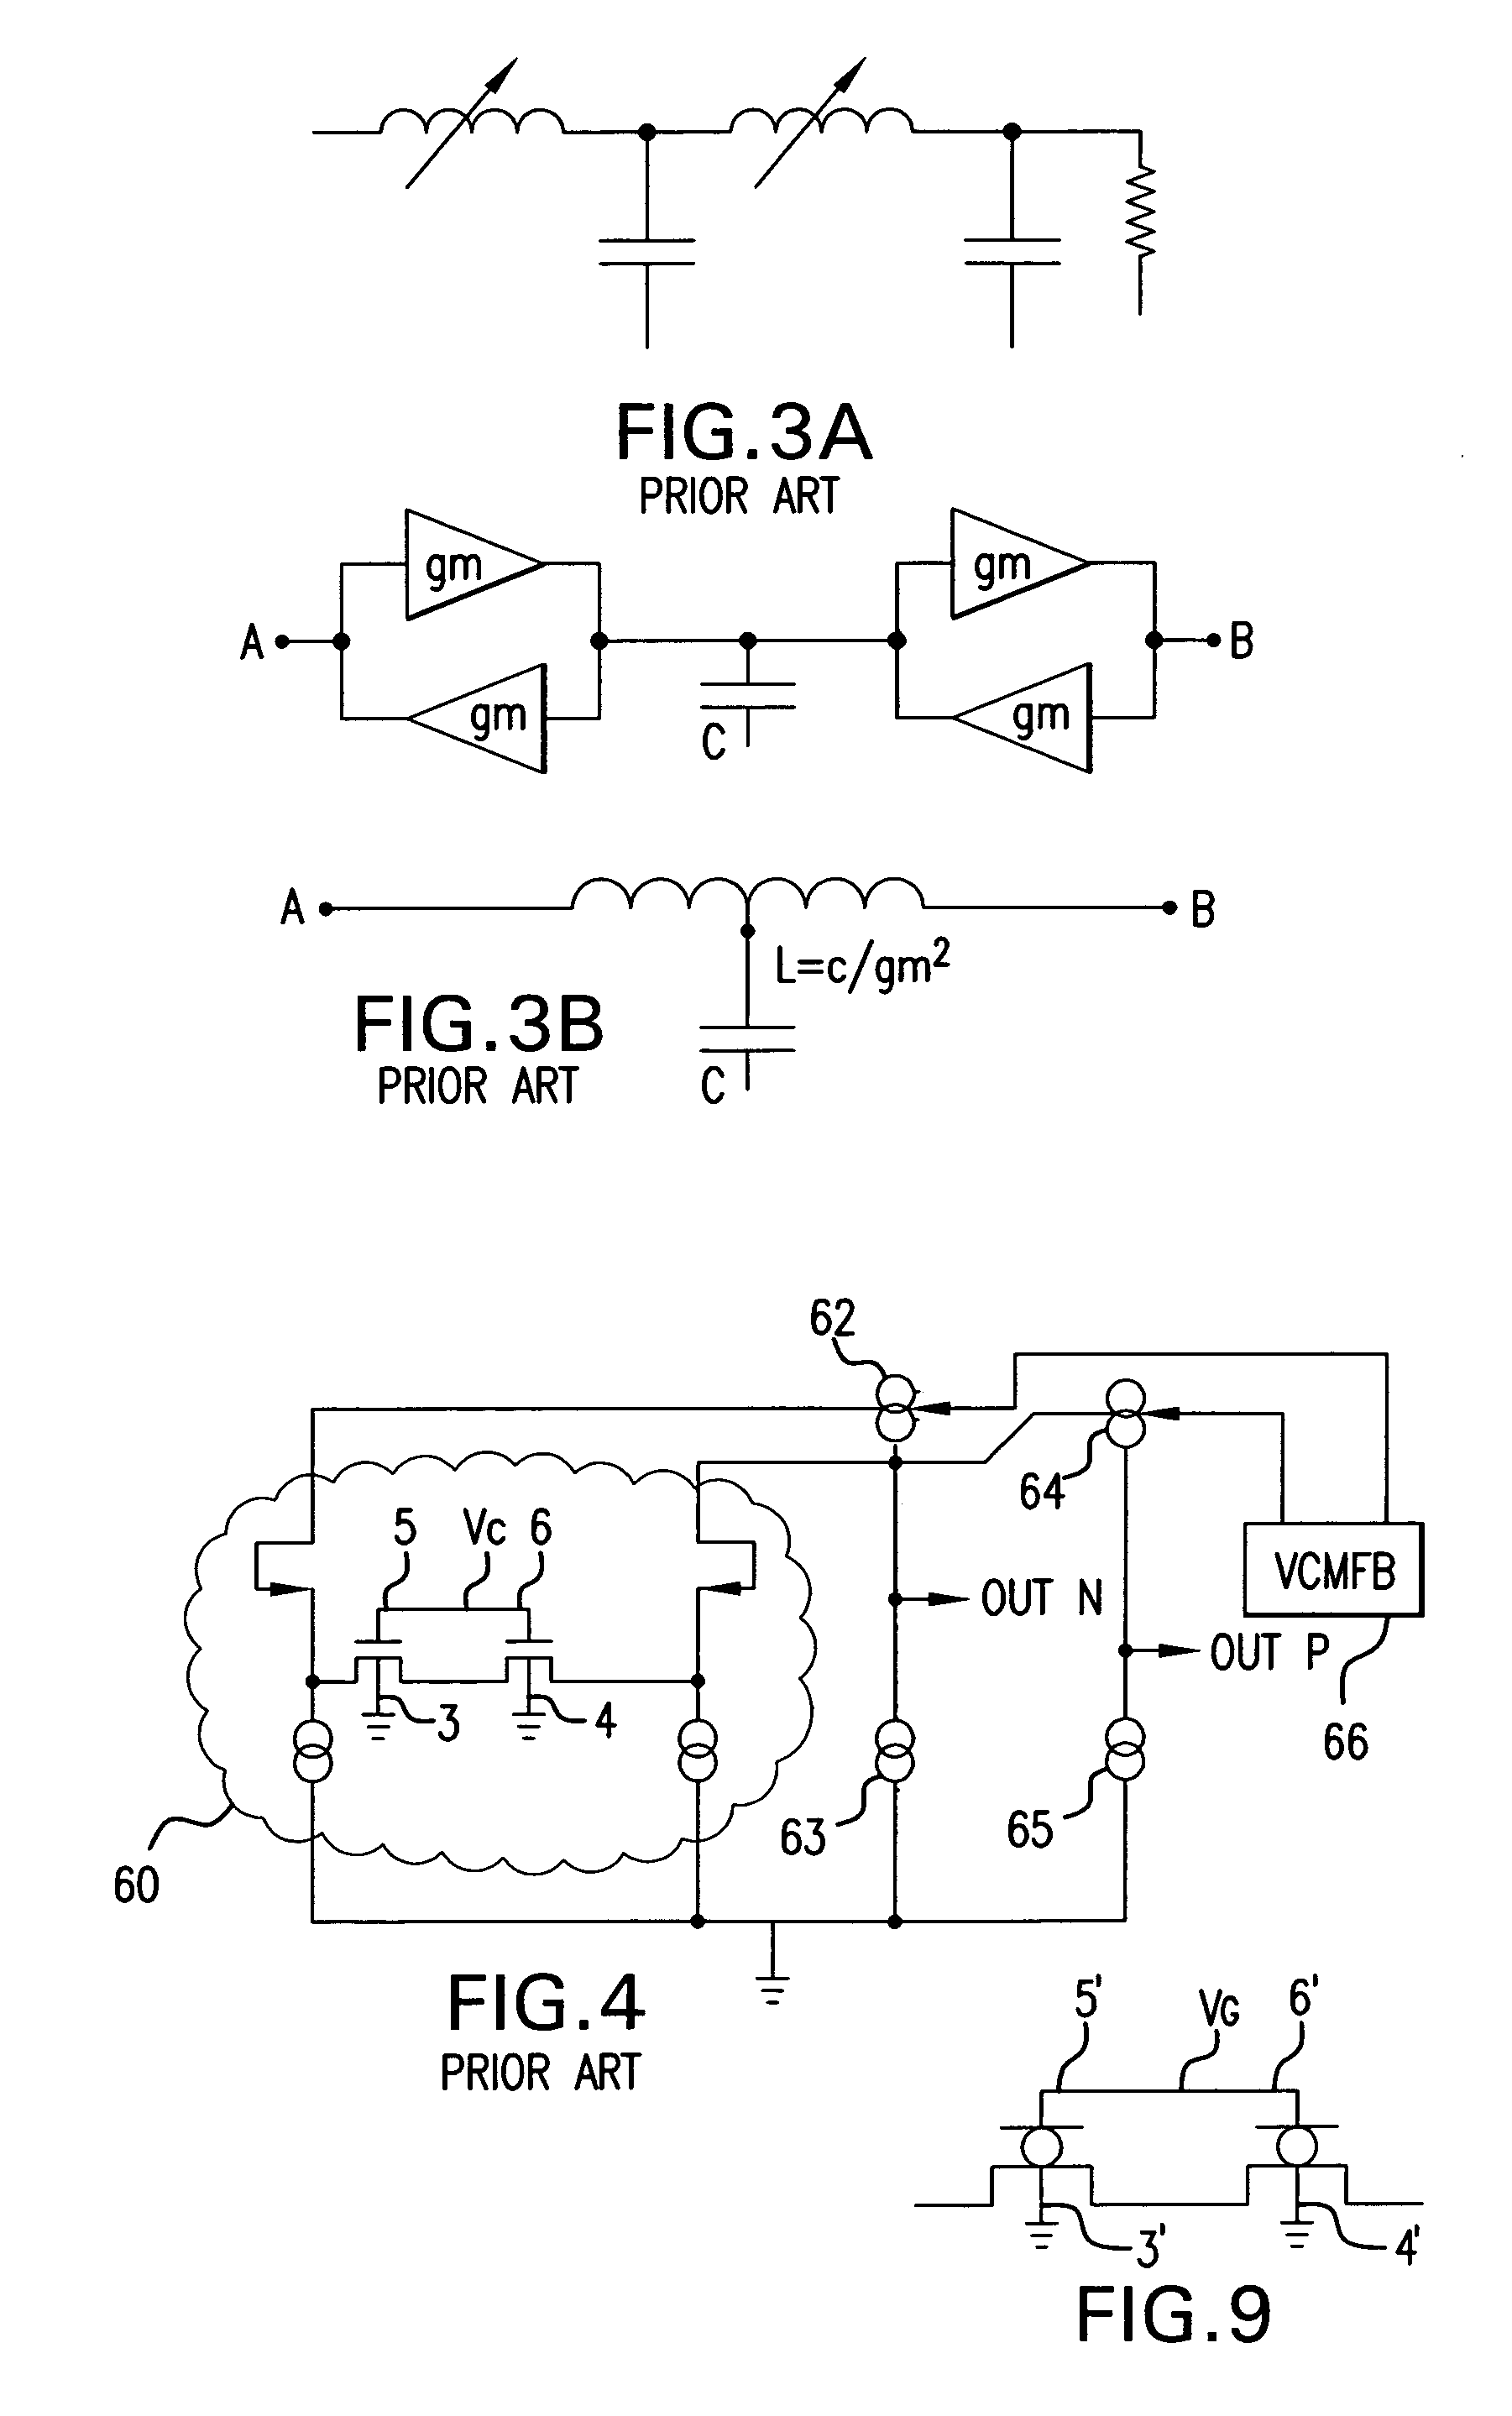 Transconductance device employing native MOS transistors